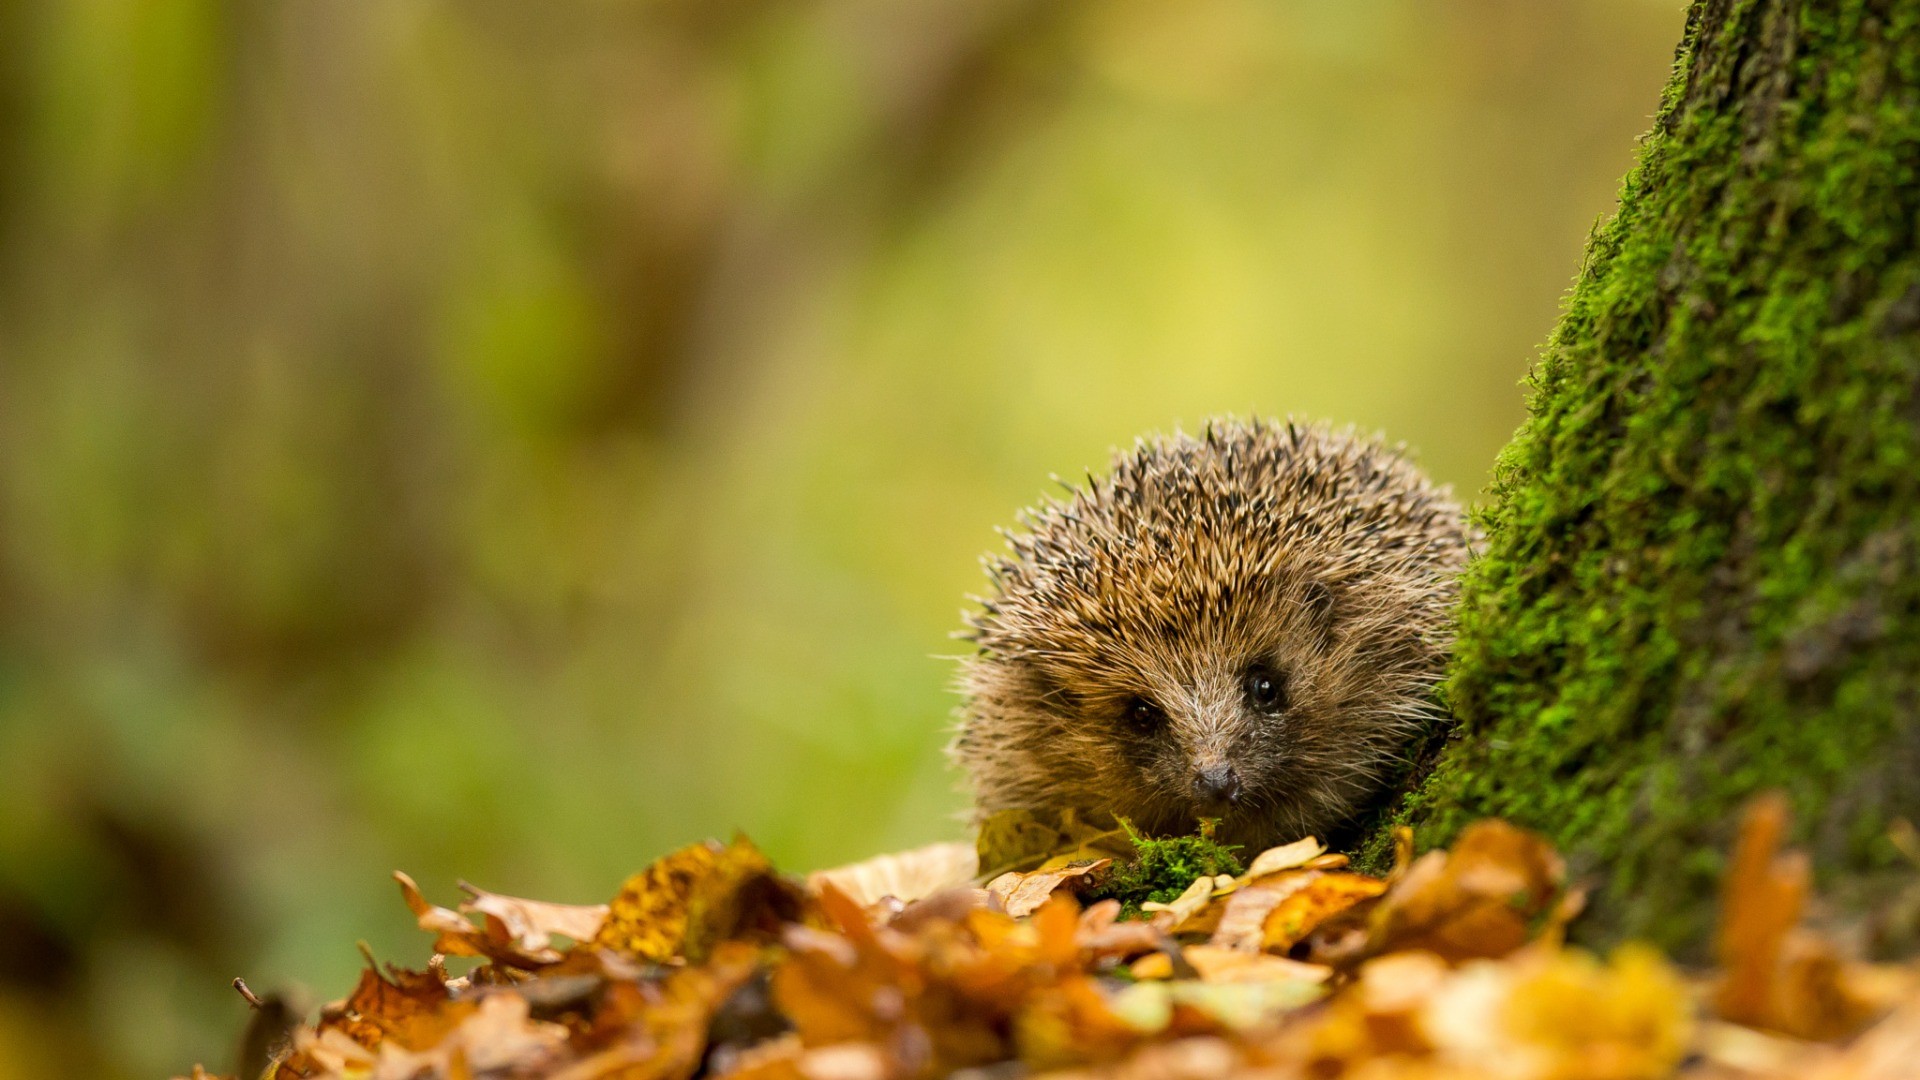 General 1920x1080 nature trees leaves branch animals hedgehog moss depth of field fall closeup mammals outdoors fallen leaves